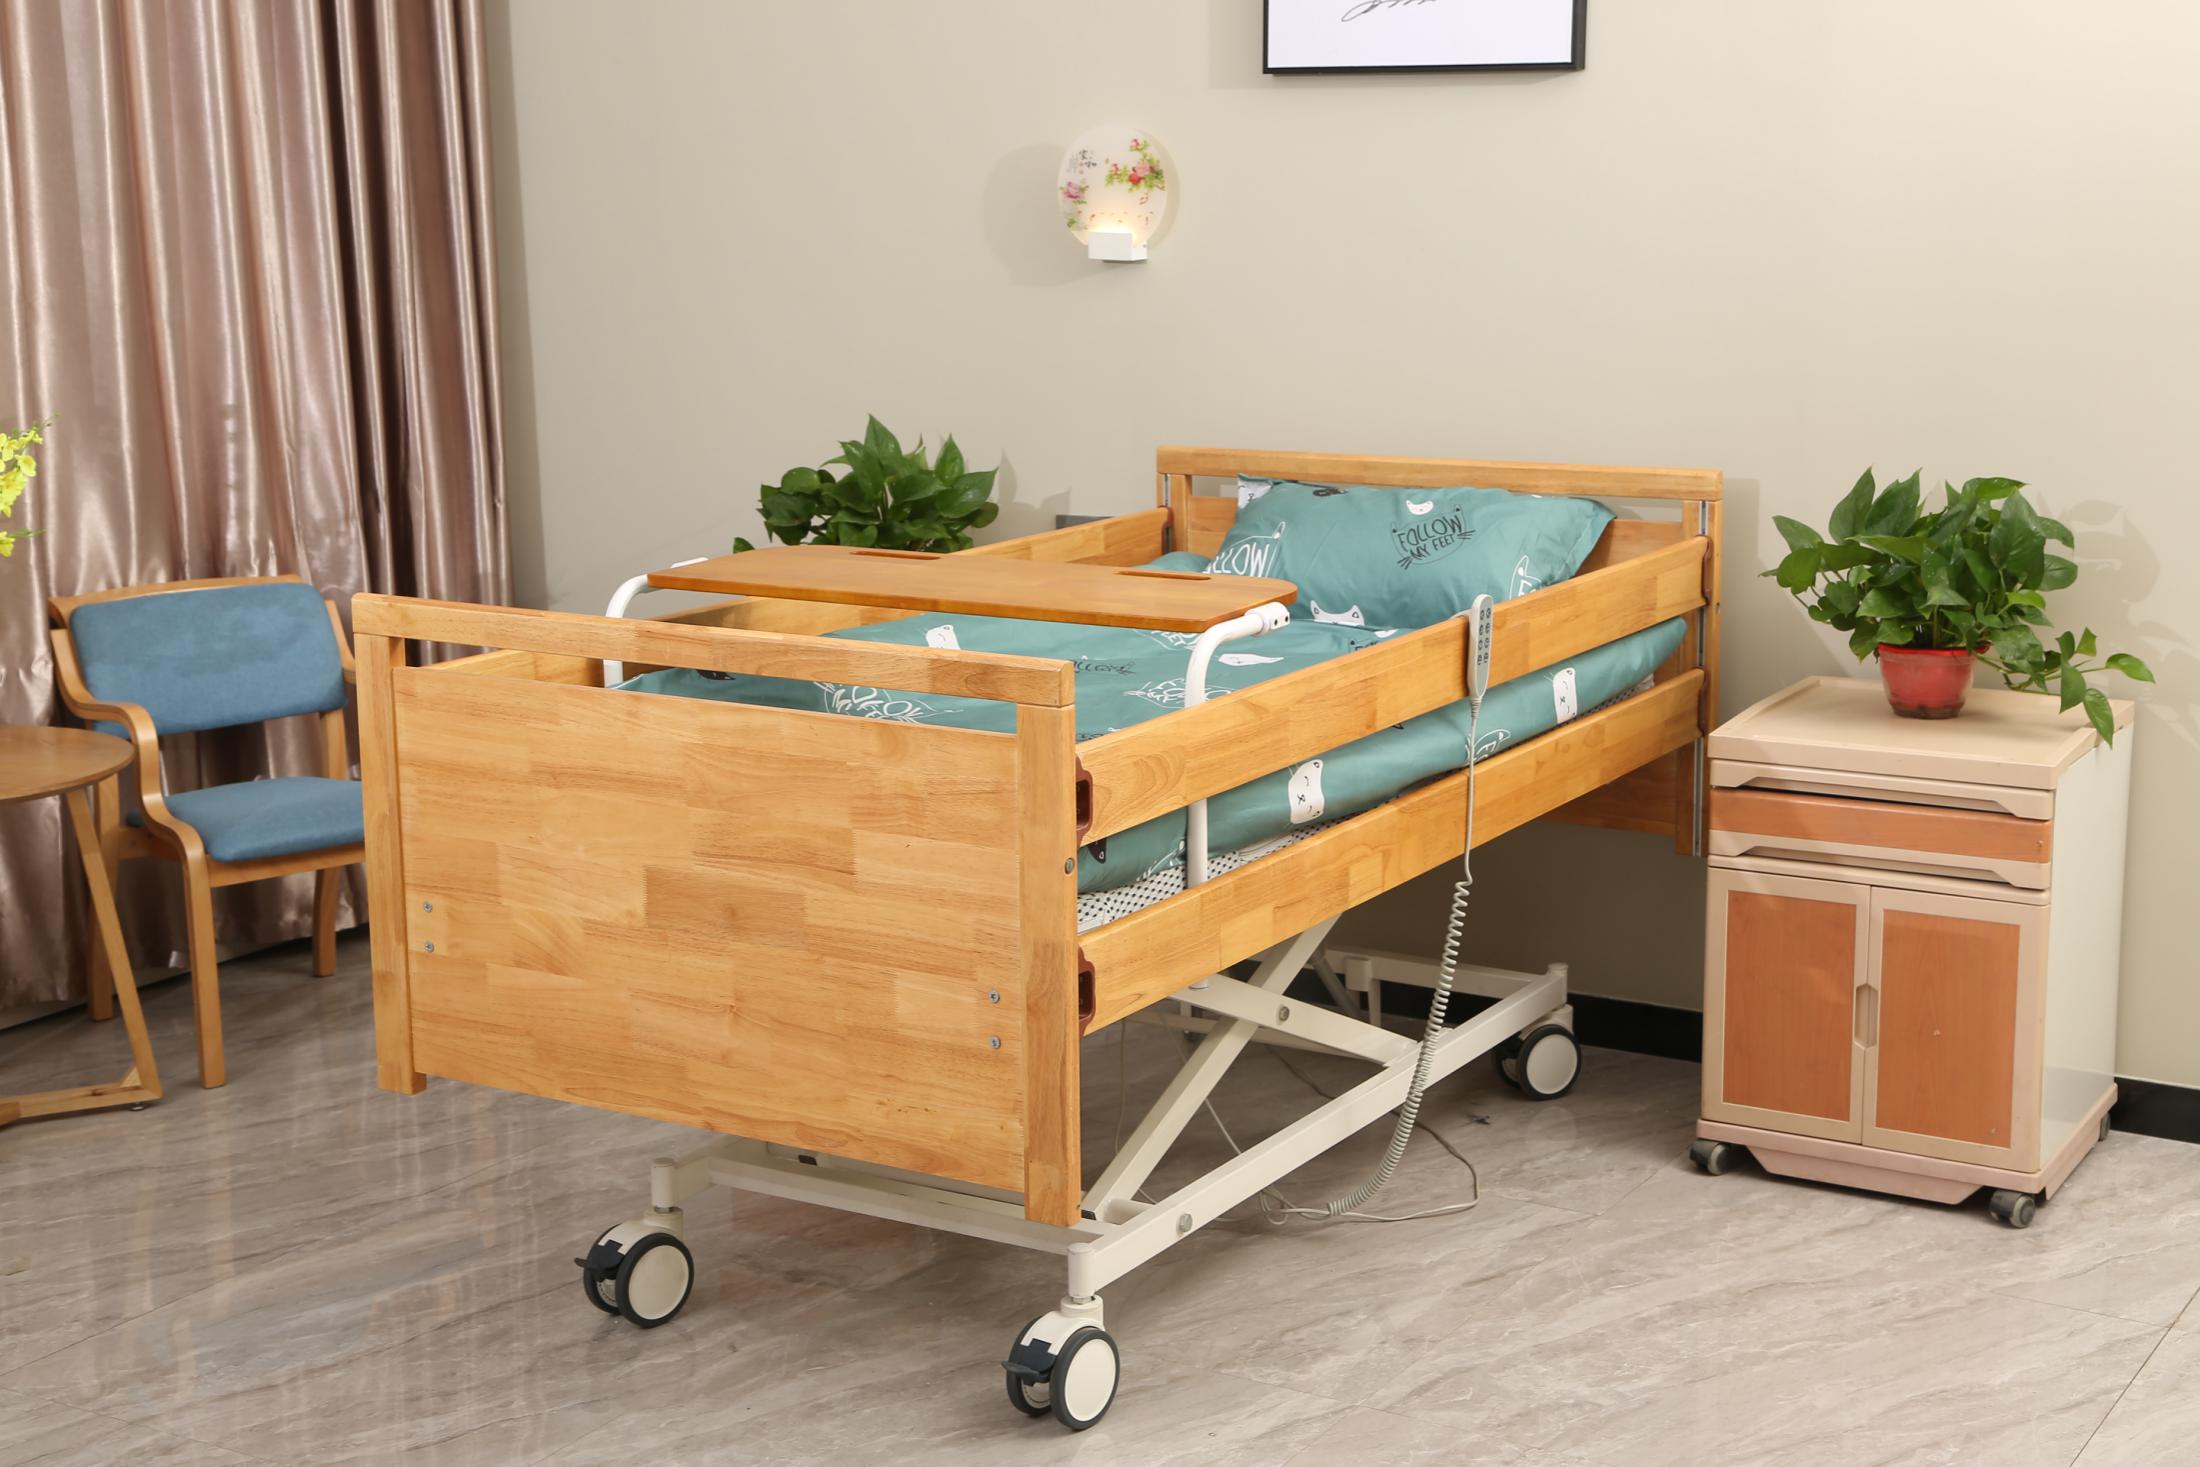 What factors should be considered when choosing a multi functional nursing bed for the elderly?